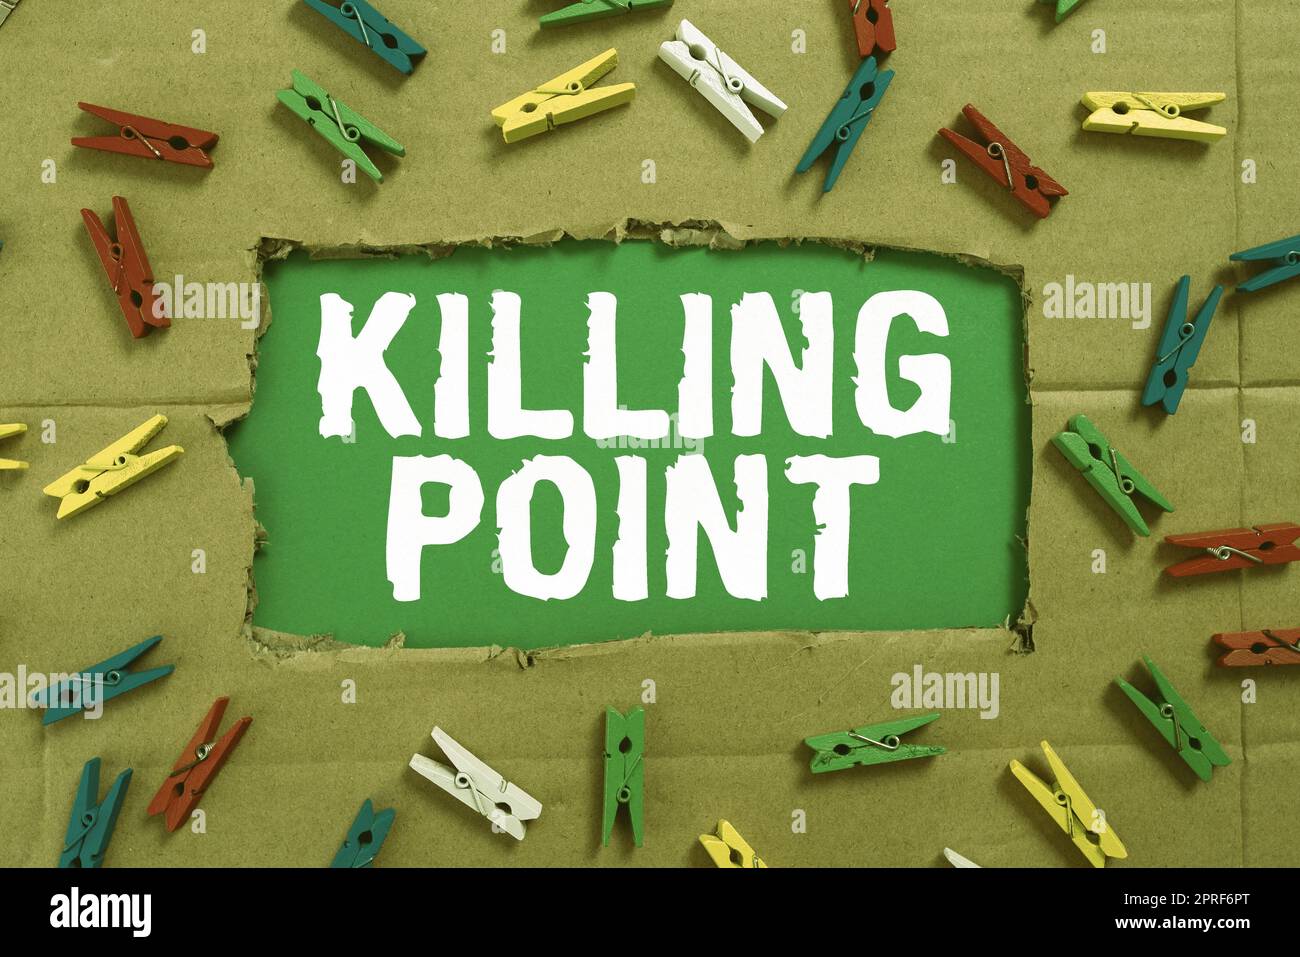 Writing displaying text Killing Point. Business approach Phase End Review Stage Gate Project Evaluation No Go Important Ideas Written Under Ripped Cardboard With Colored Pegs Around. Stock Photo